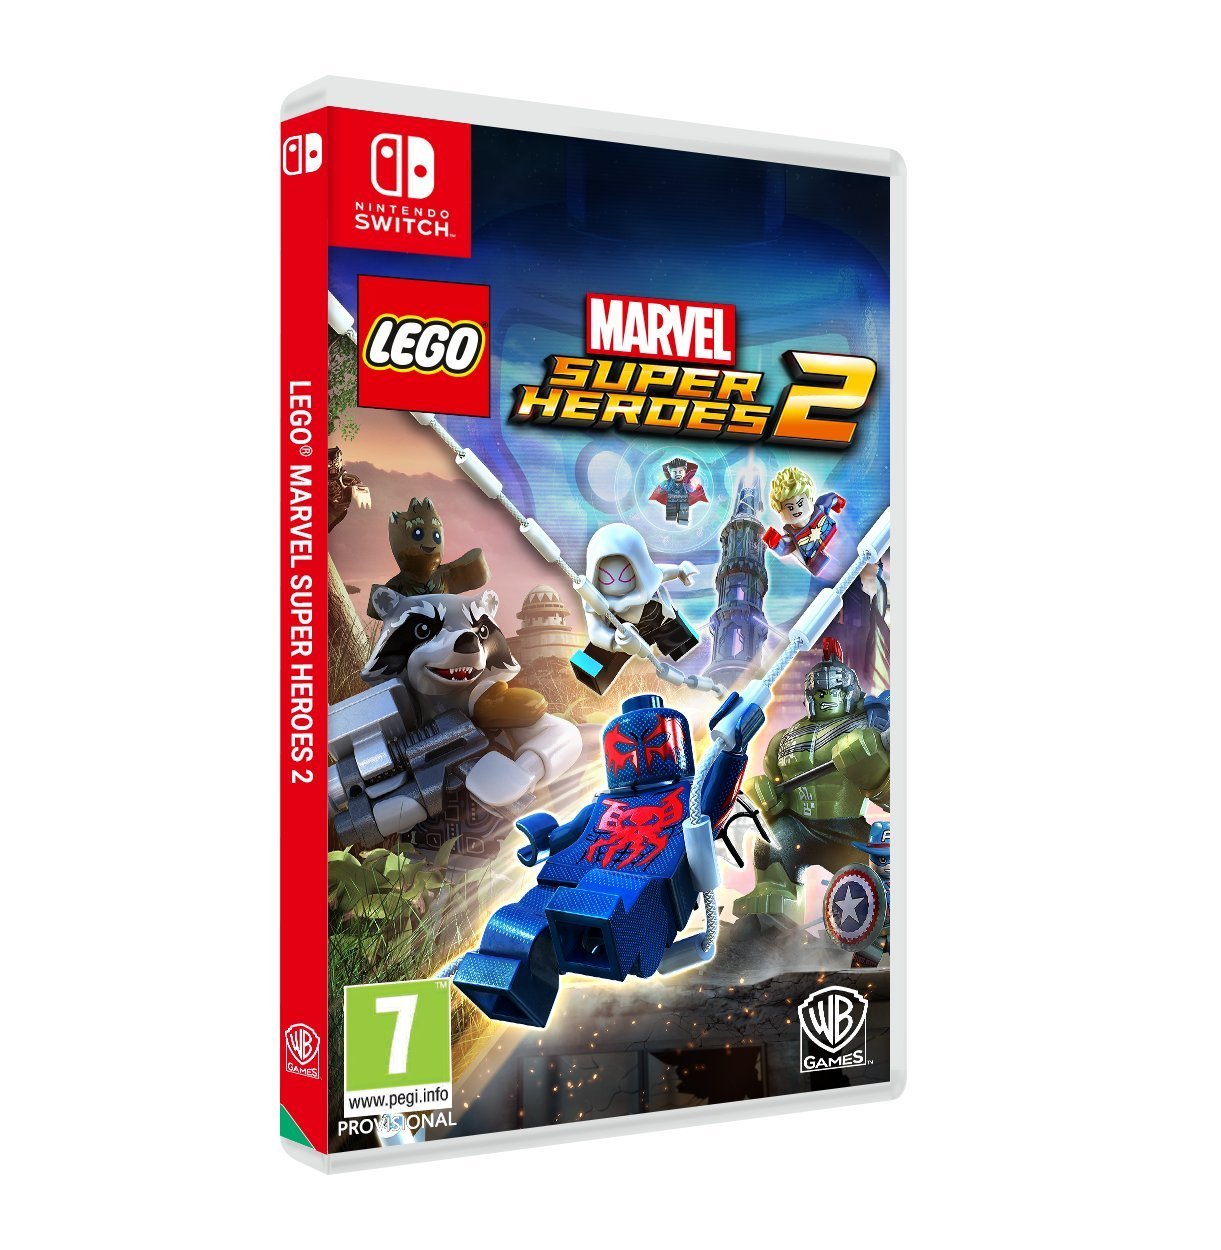 LEGO Marvel Super Heroes 2 - Nintendo Switch New Everyone 10+ Video Games - image 2 of 2